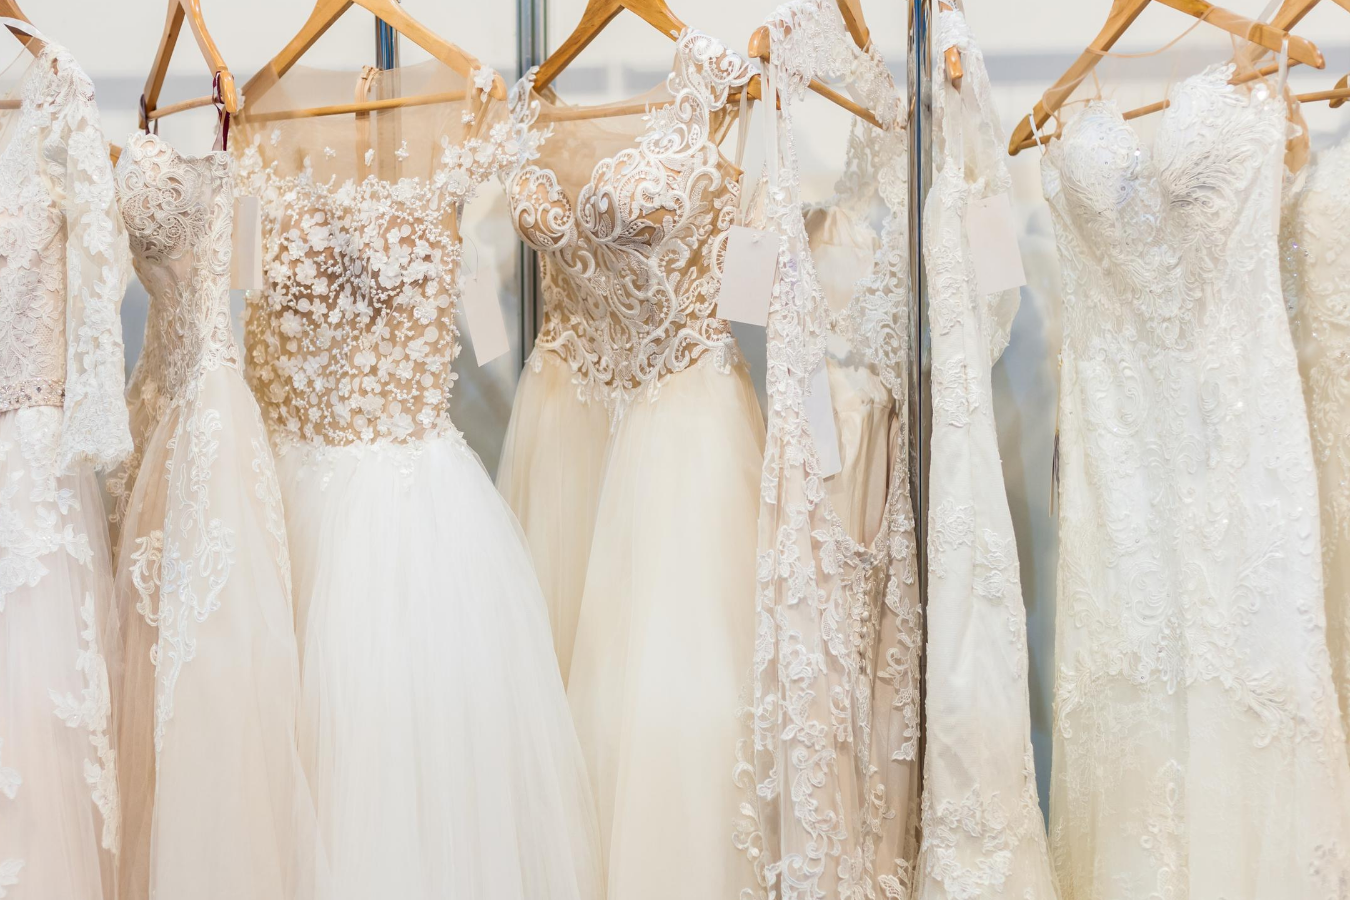 Photo of different types of Wedding Dresses